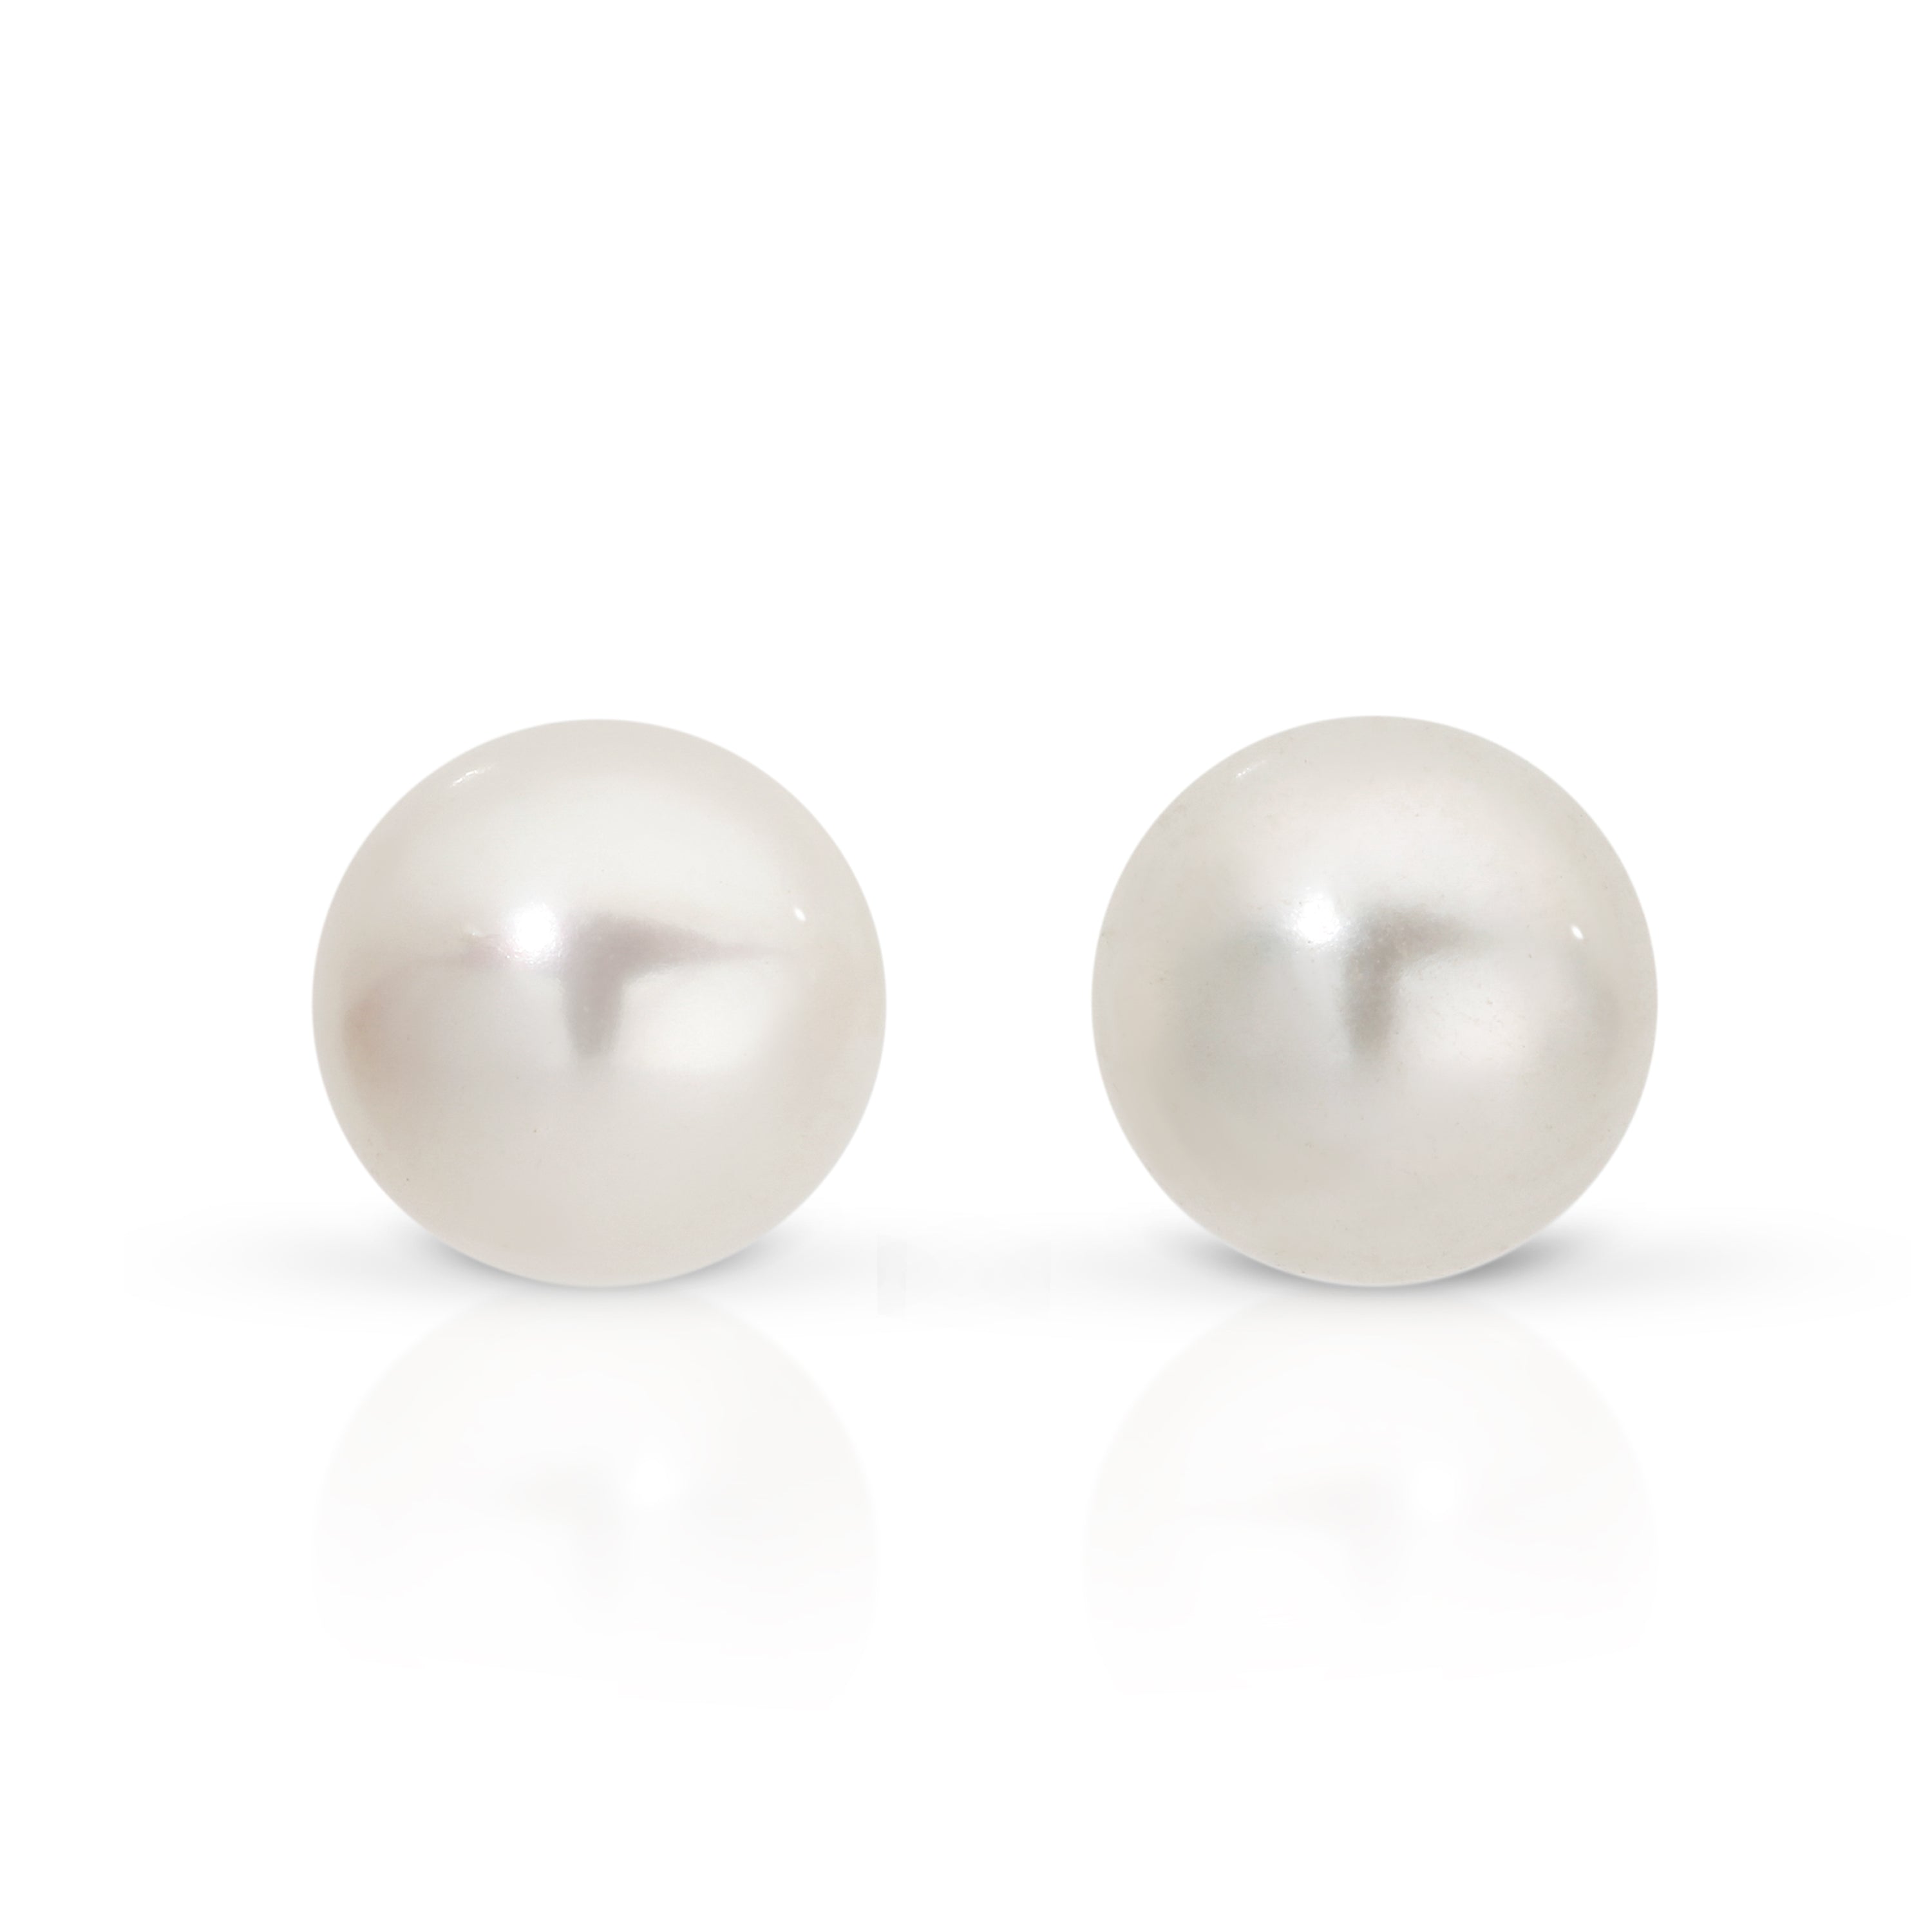 Silver 6mm freshwater pearl studs